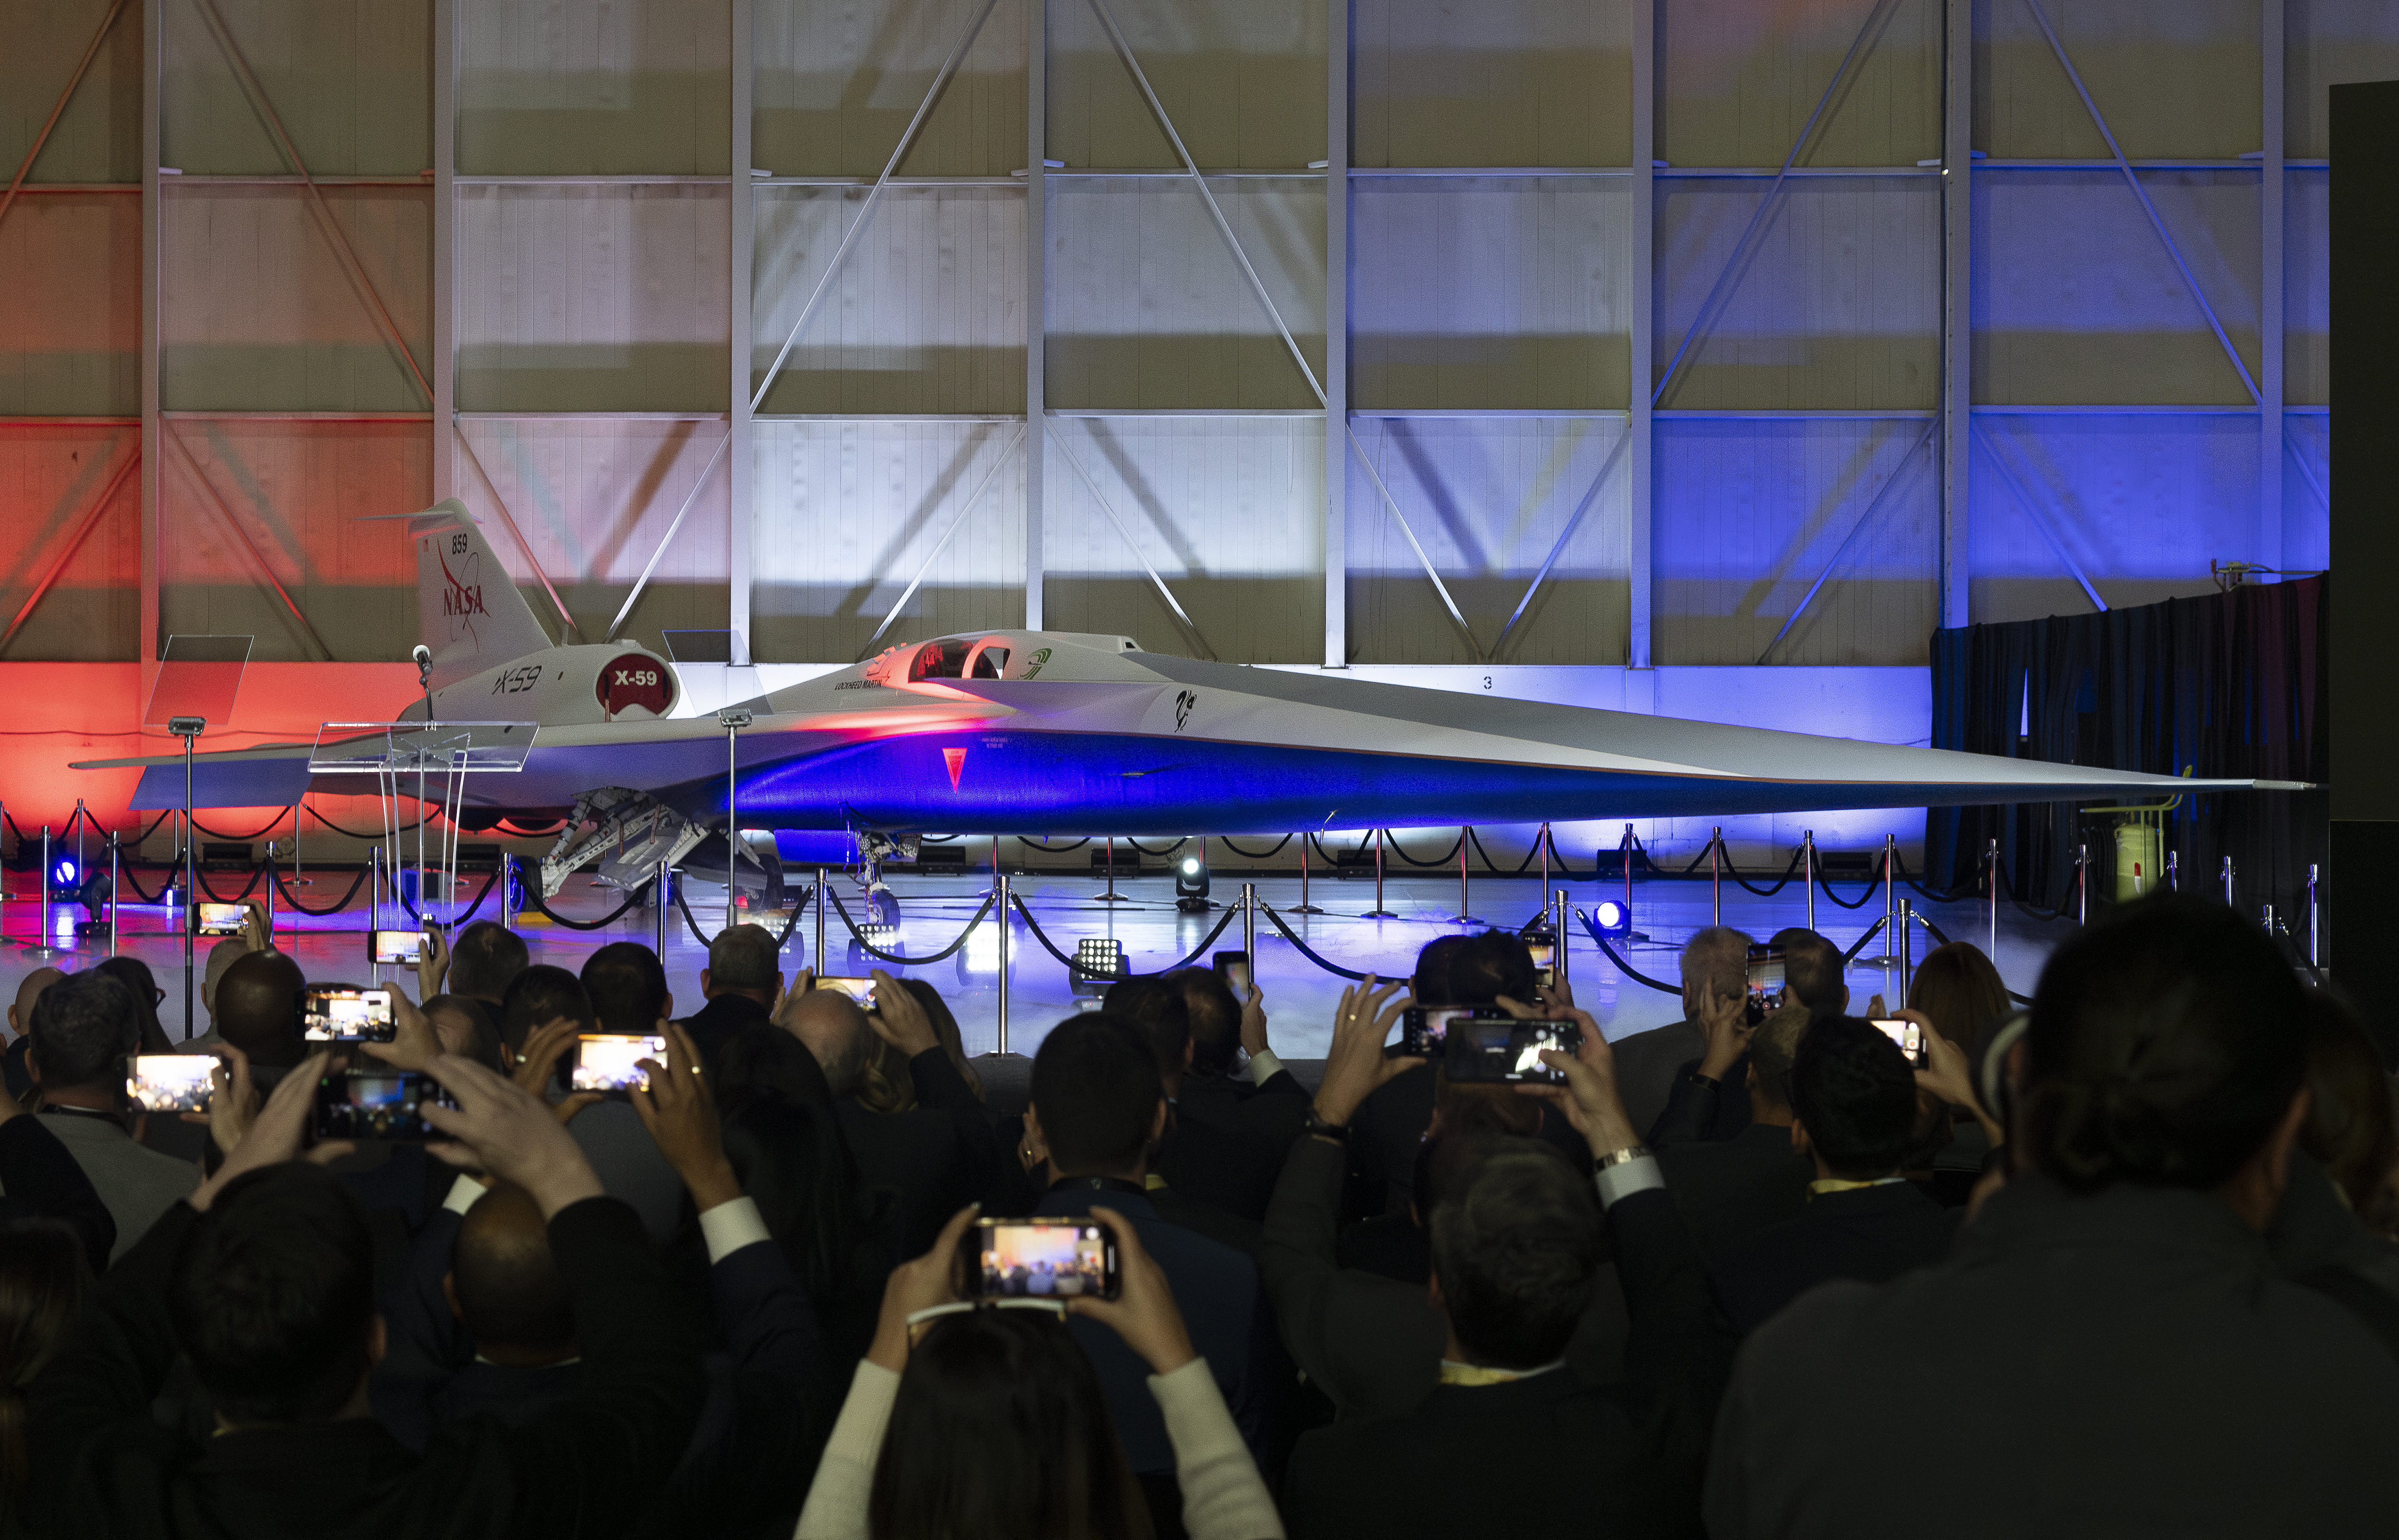 Members of an audience lift their phones to snap a photo of the recently revealed X-59 aircraft. The plane's long, sharp nose appears to jut out towards the audience.